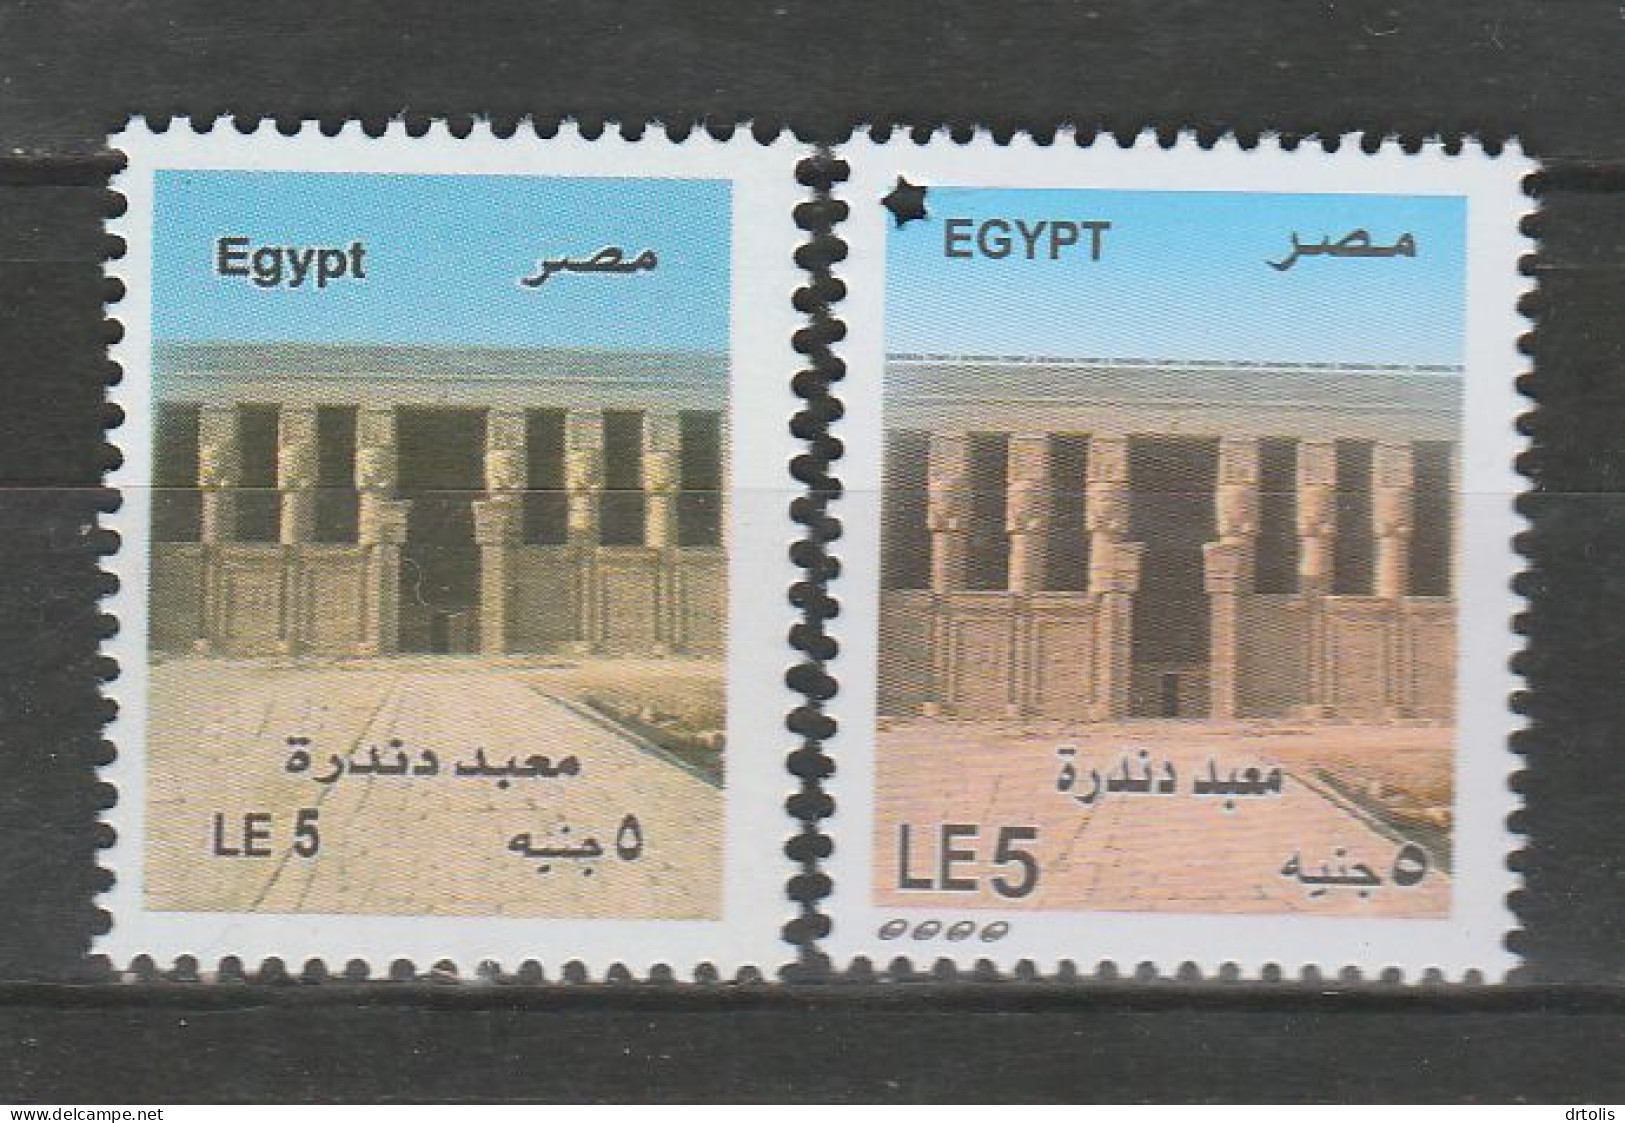 EGYPT / 2017 ( PERF. 13 ) & 2023 ( PERF. 14 )  / DENDERA TEMPLE COMPLEX / 2 DIFFERENT EDITIONS / MNH / VF - Ungebraucht